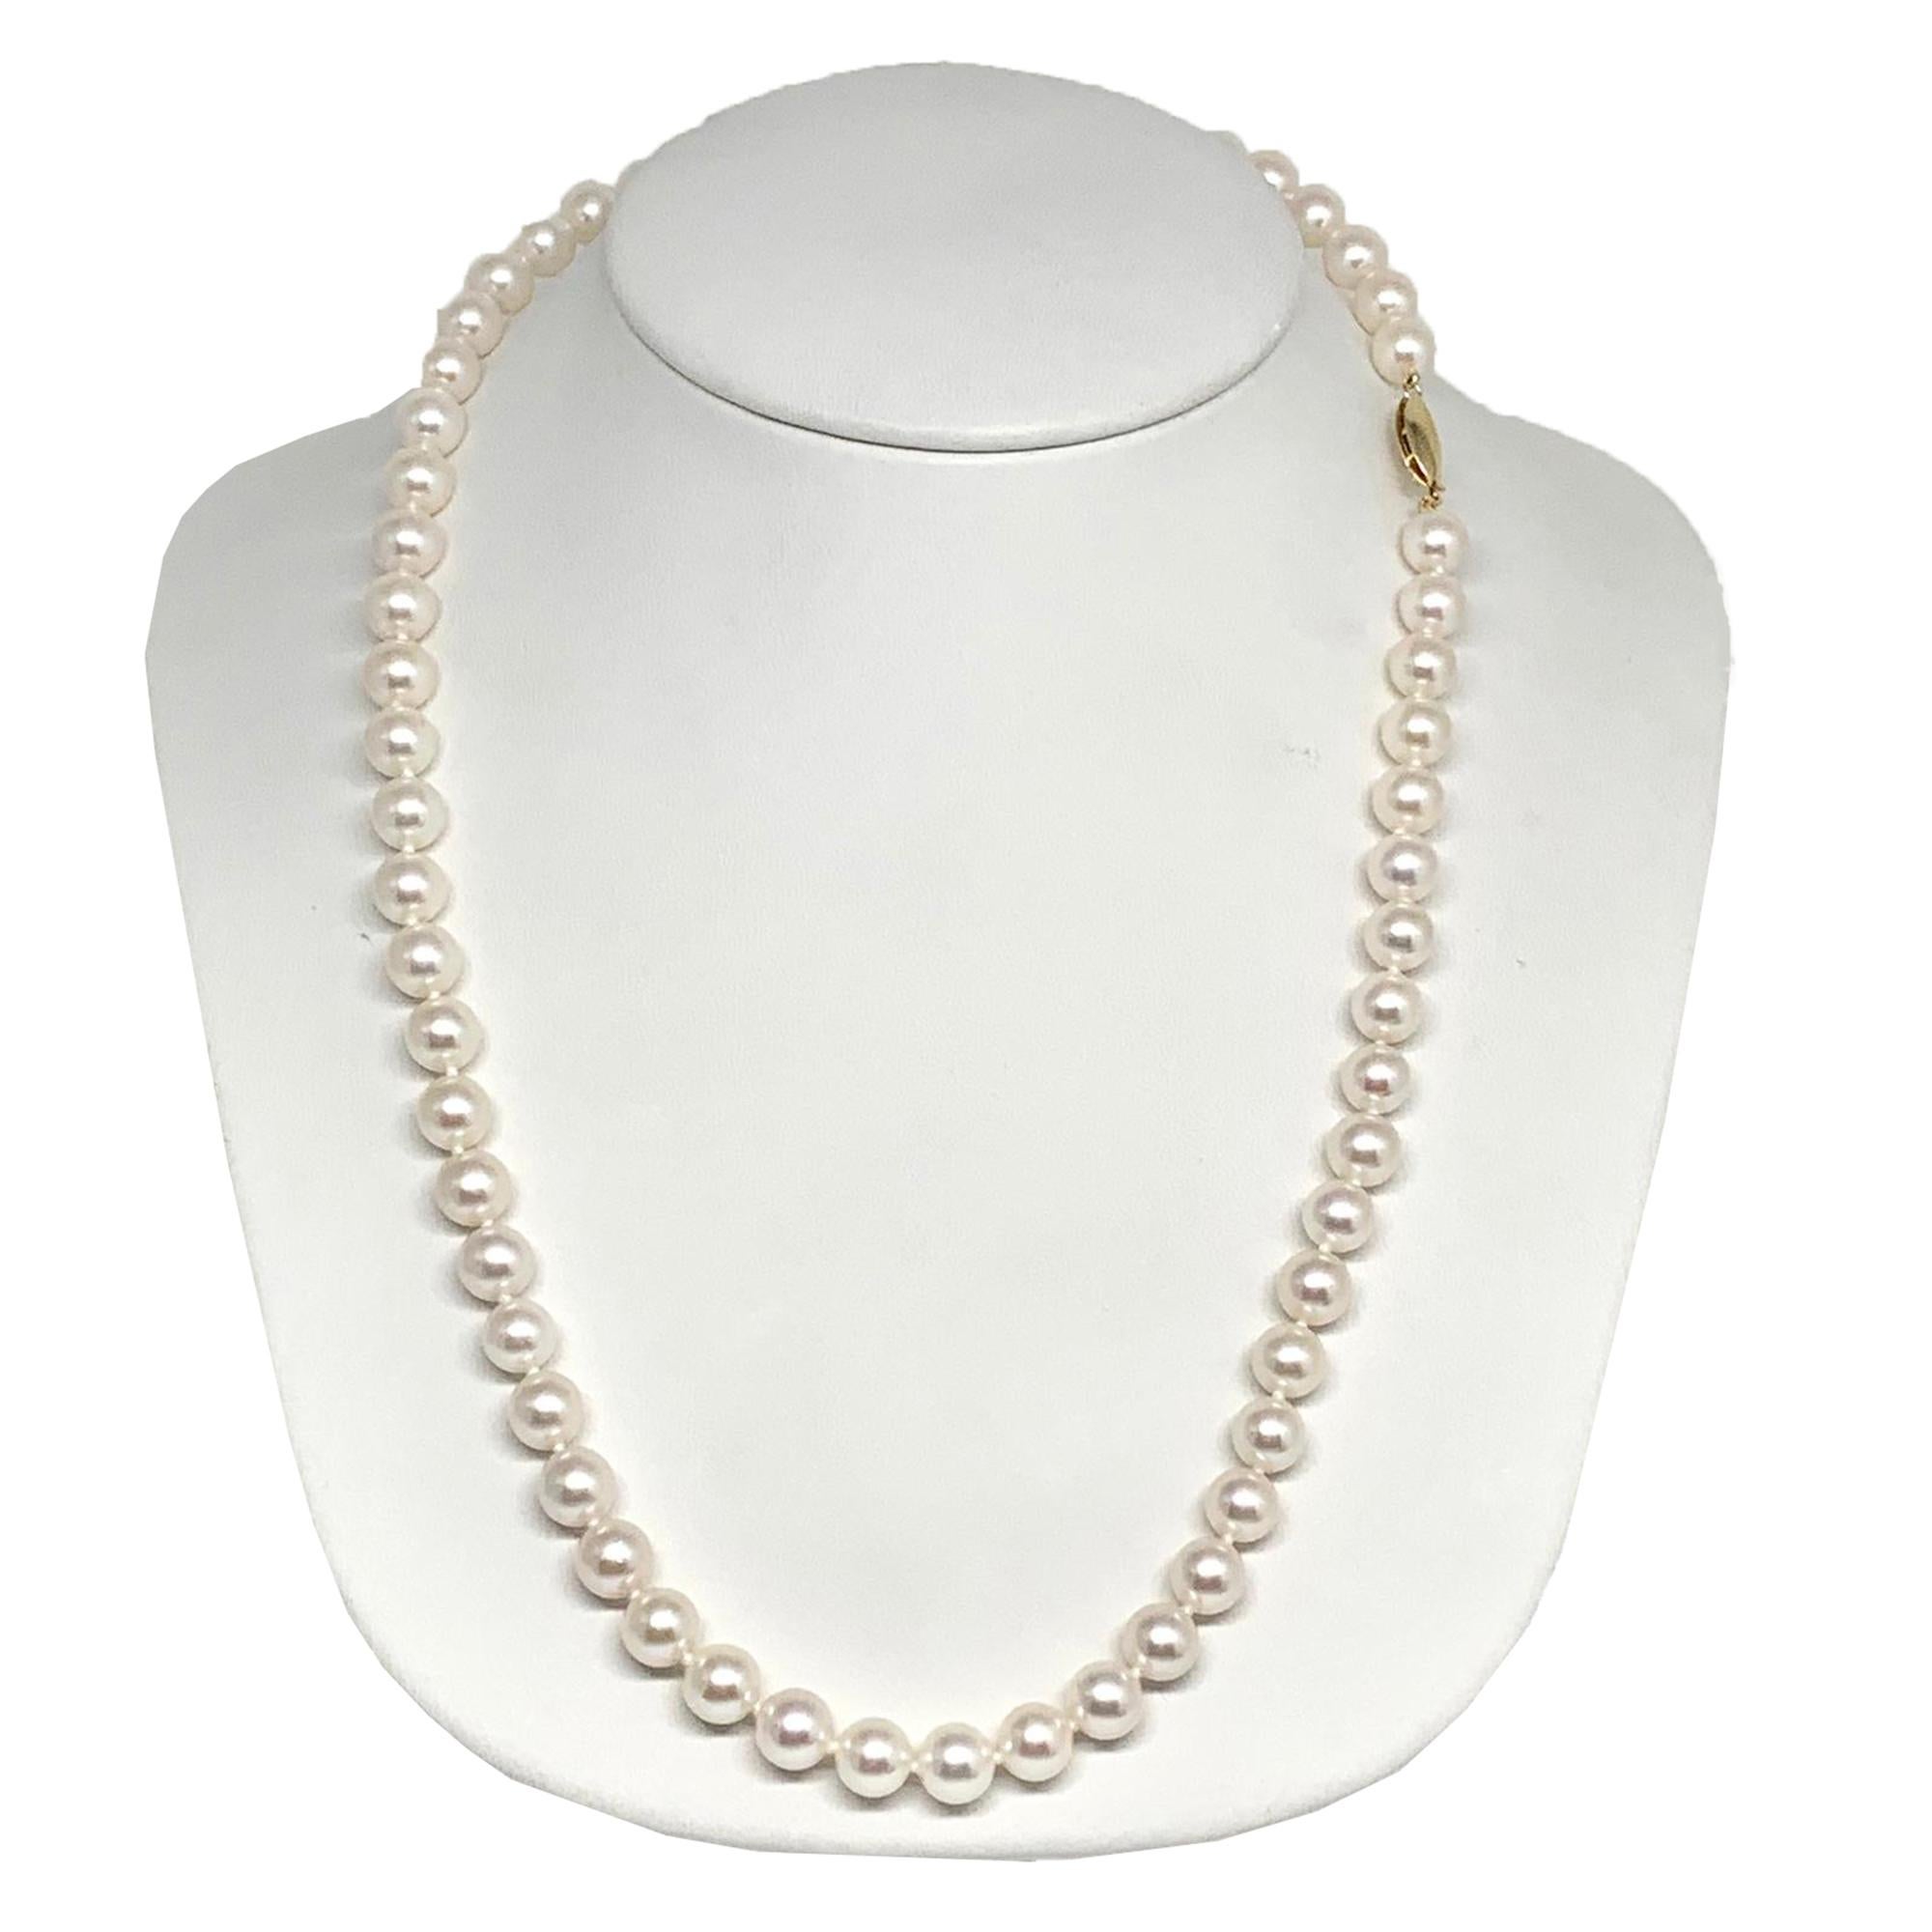 This is a Magnificent and Elegant LARGE 7-6.5 mm 18 inch Saltwater Akoya Pearl Necklace with a 14 KT Solid Gold Clasp which has been certified for $2,950
This is a One of a Kind Unique Custom Made Glamorous Piece of Jewelry!!
Nothing says, “I Love